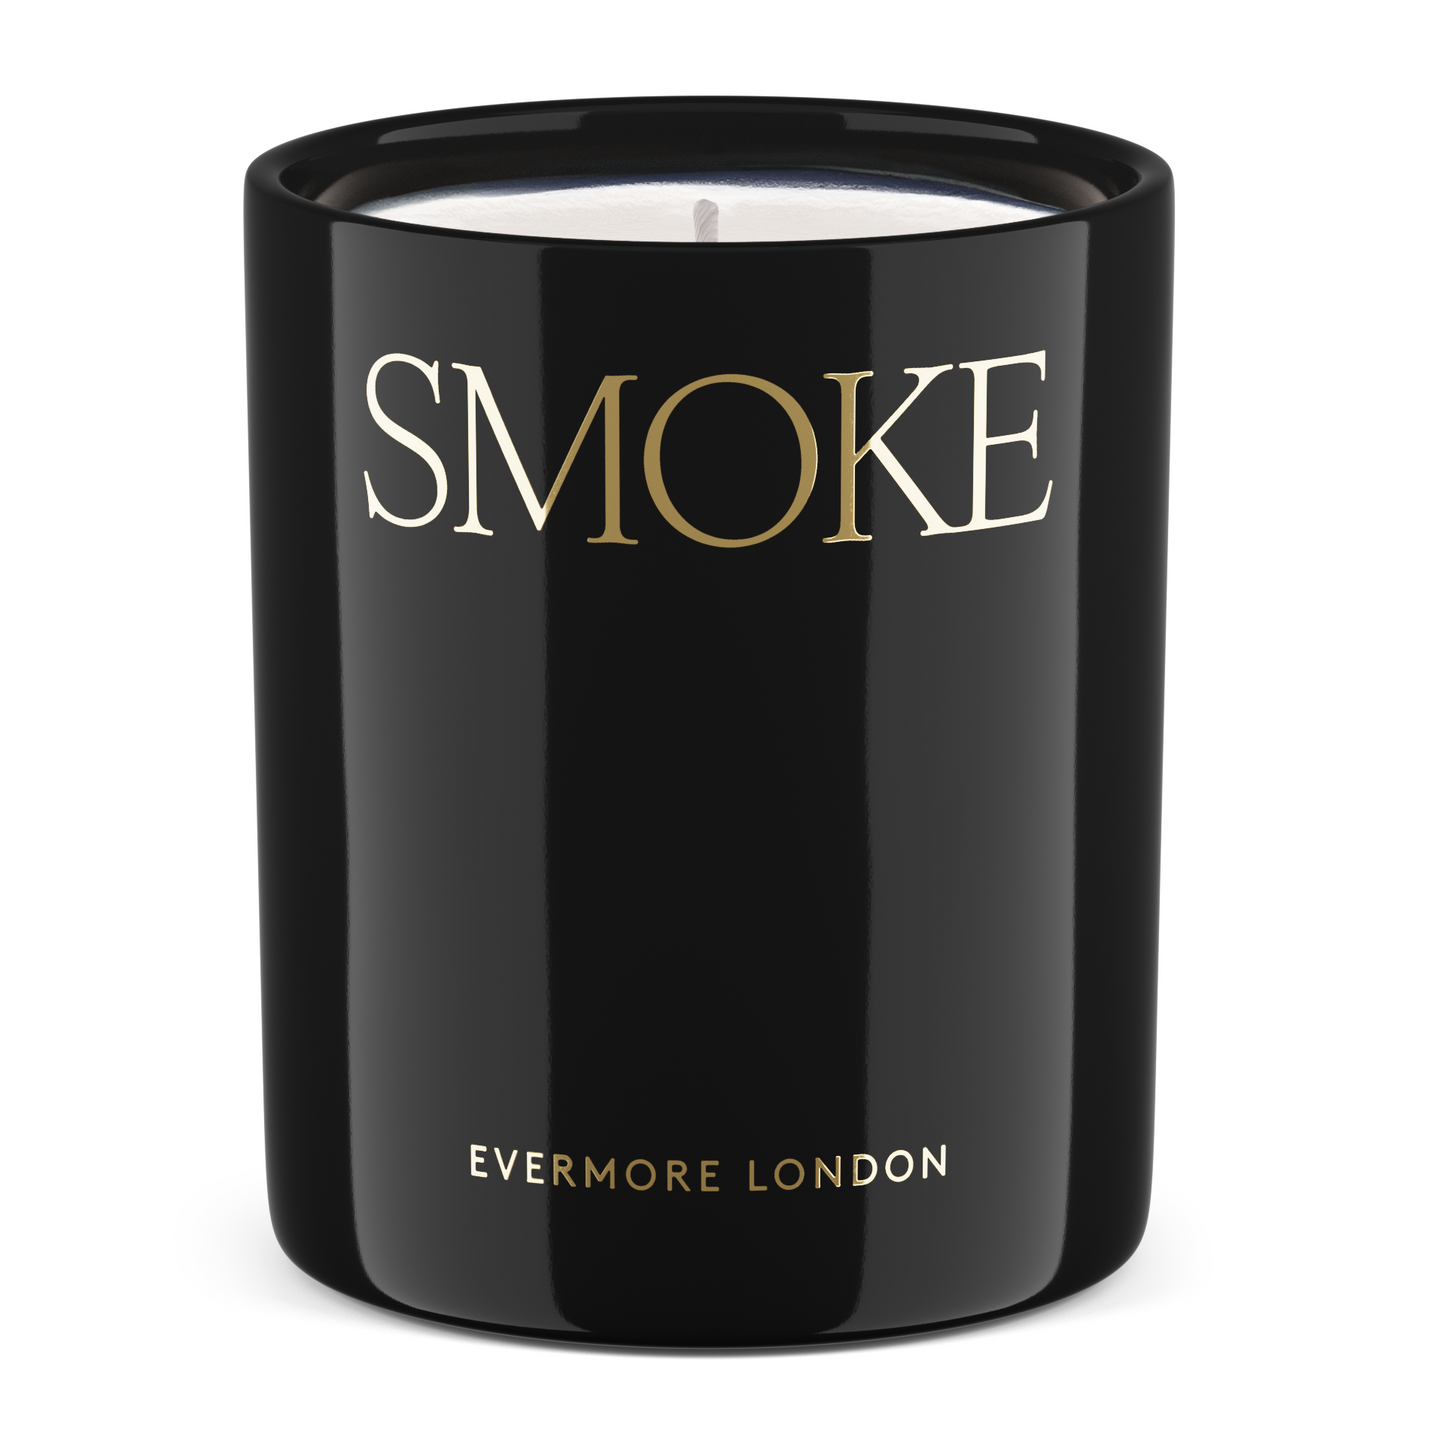 scented candle to compliment cigars